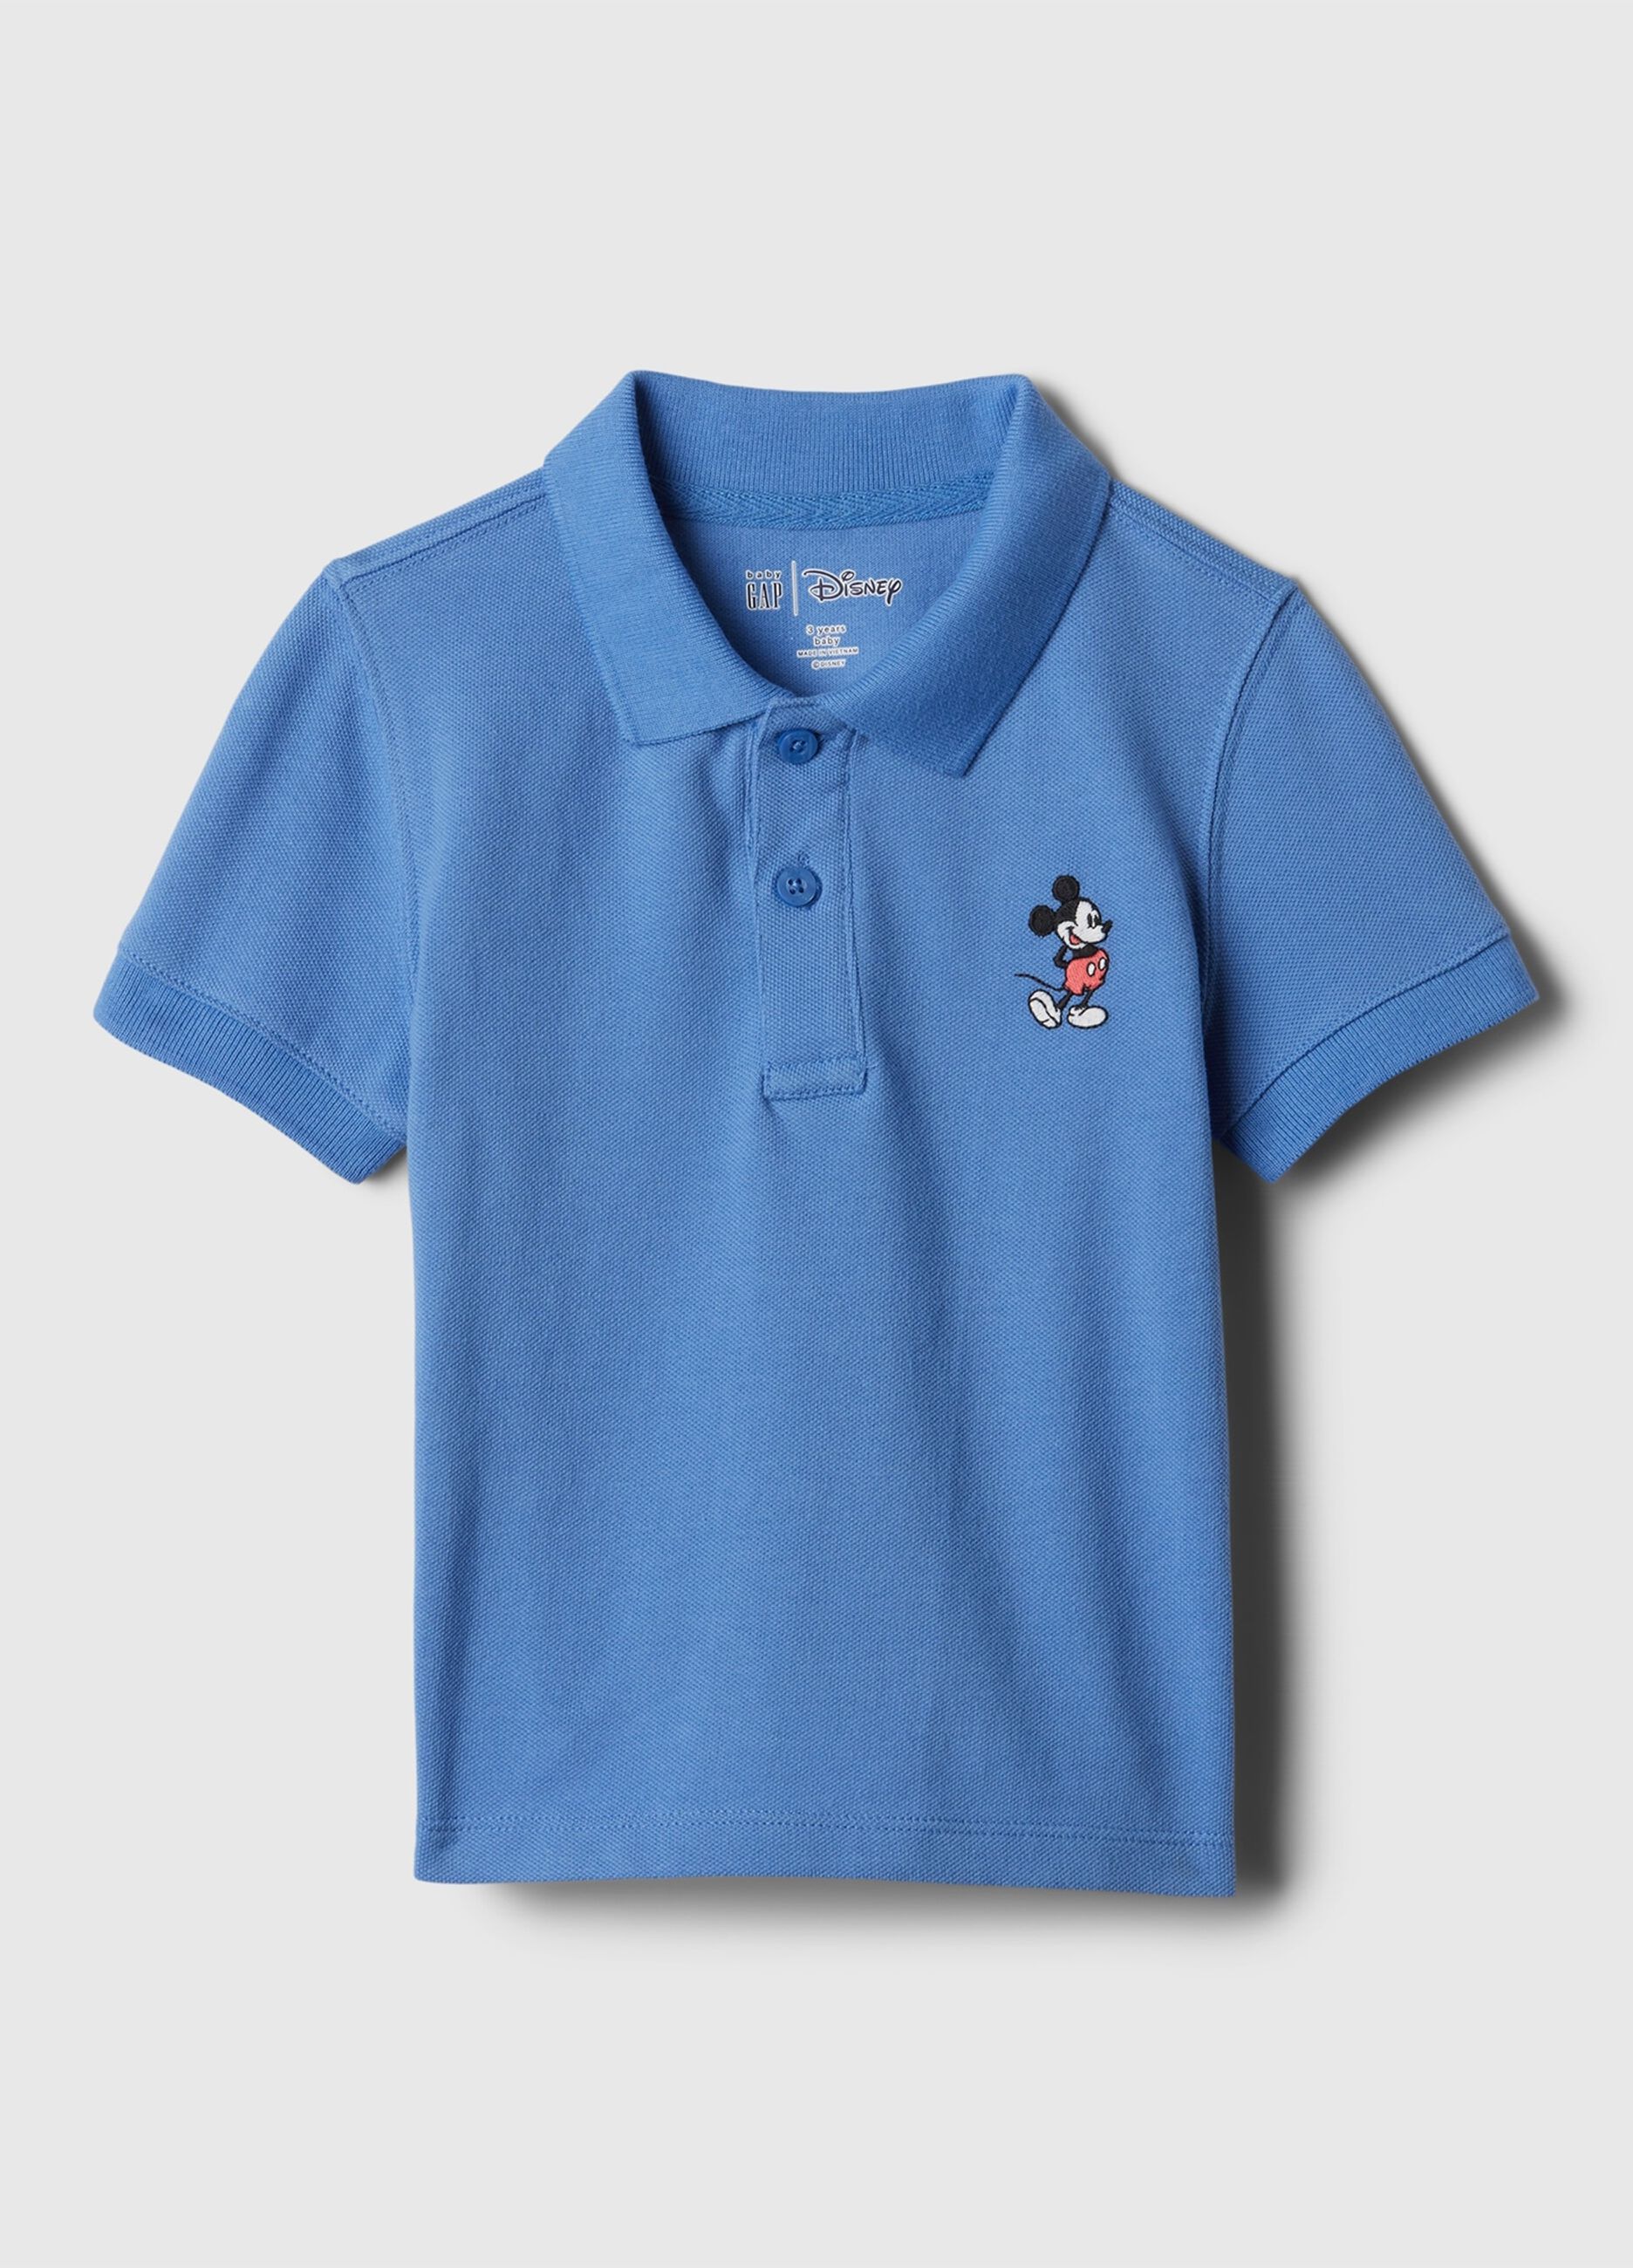 Piquet polo shirt with Disney Mickey Mouse embroidery